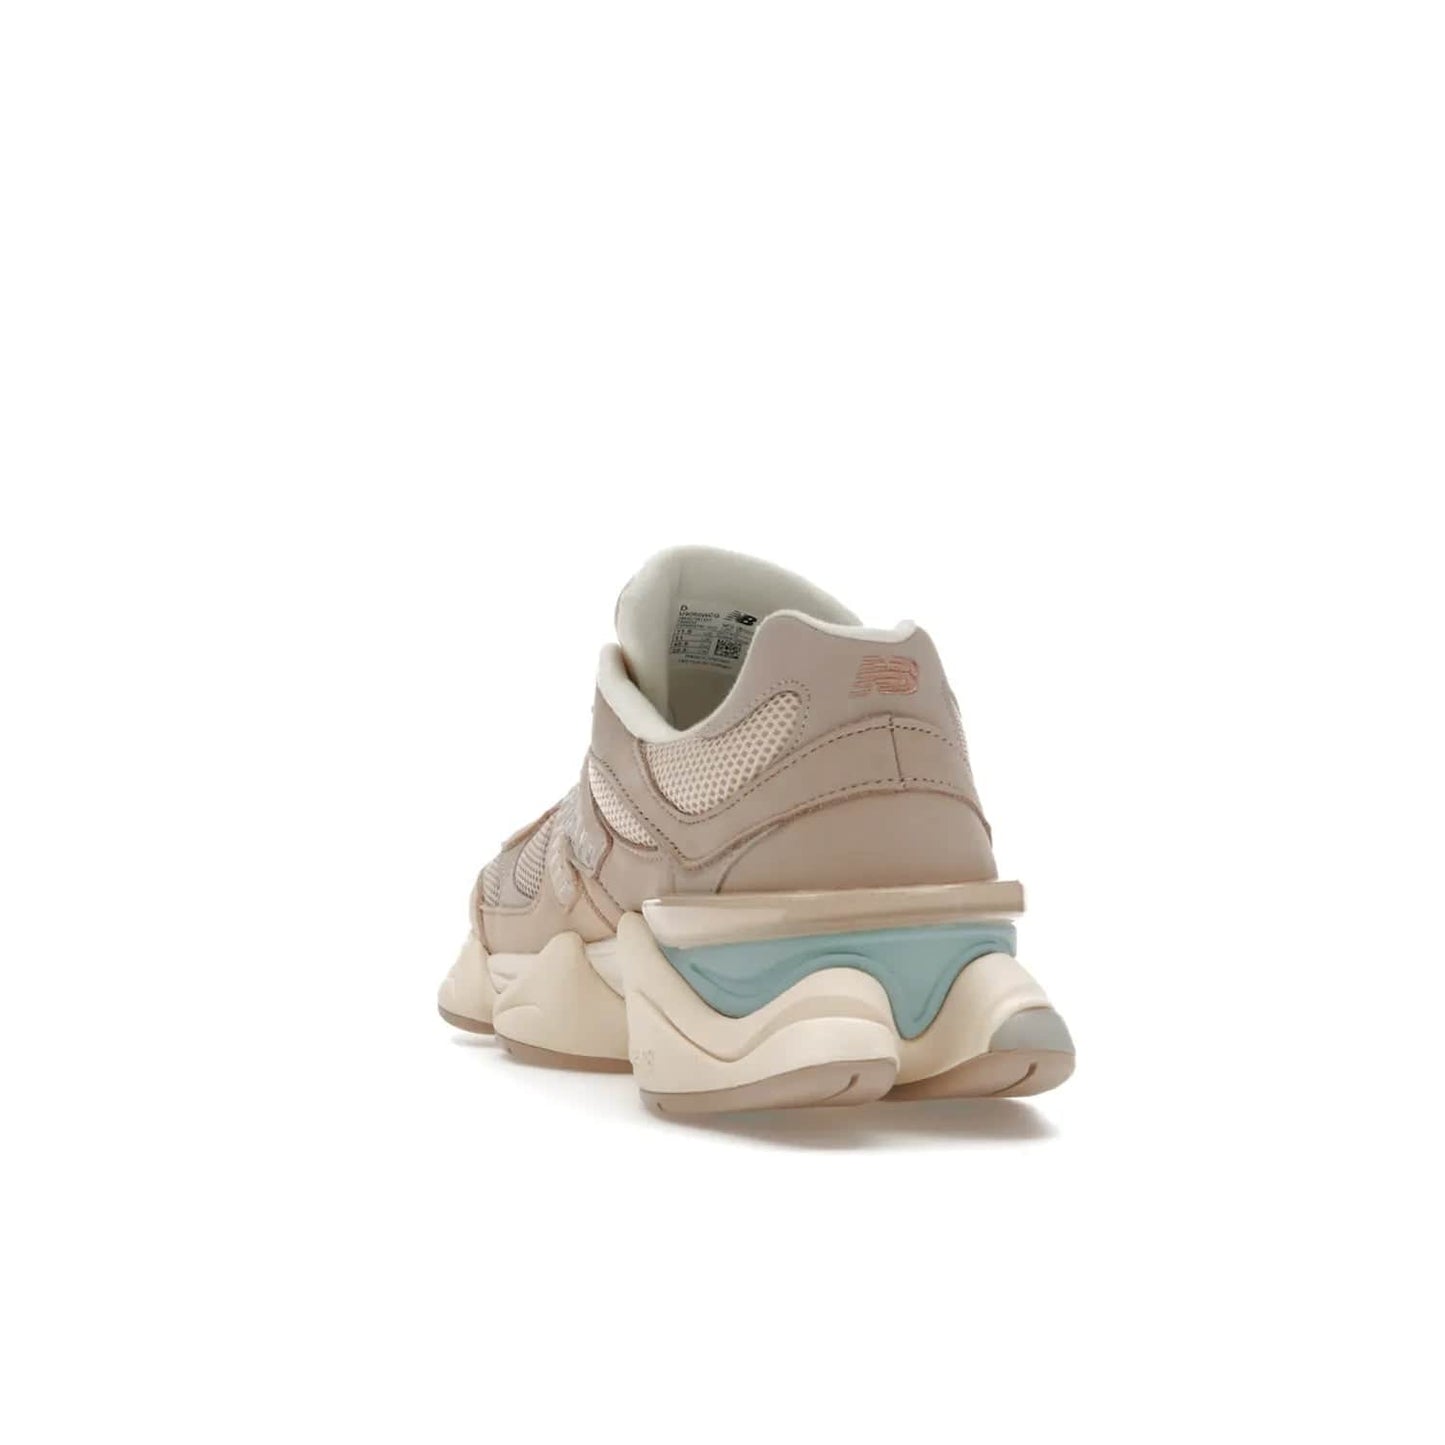 New Balance 9060 Ivory Cream Pink Sand - Image 26 - Only at www.BallersClubKickz.com - New Balance 9060 Ivory Cream Pink Sand - Sleek meshed upper, premium suede overlays, ABZORB cushioning. Get this unique sneaker ahead of the trend, launching December 6th, 2022!